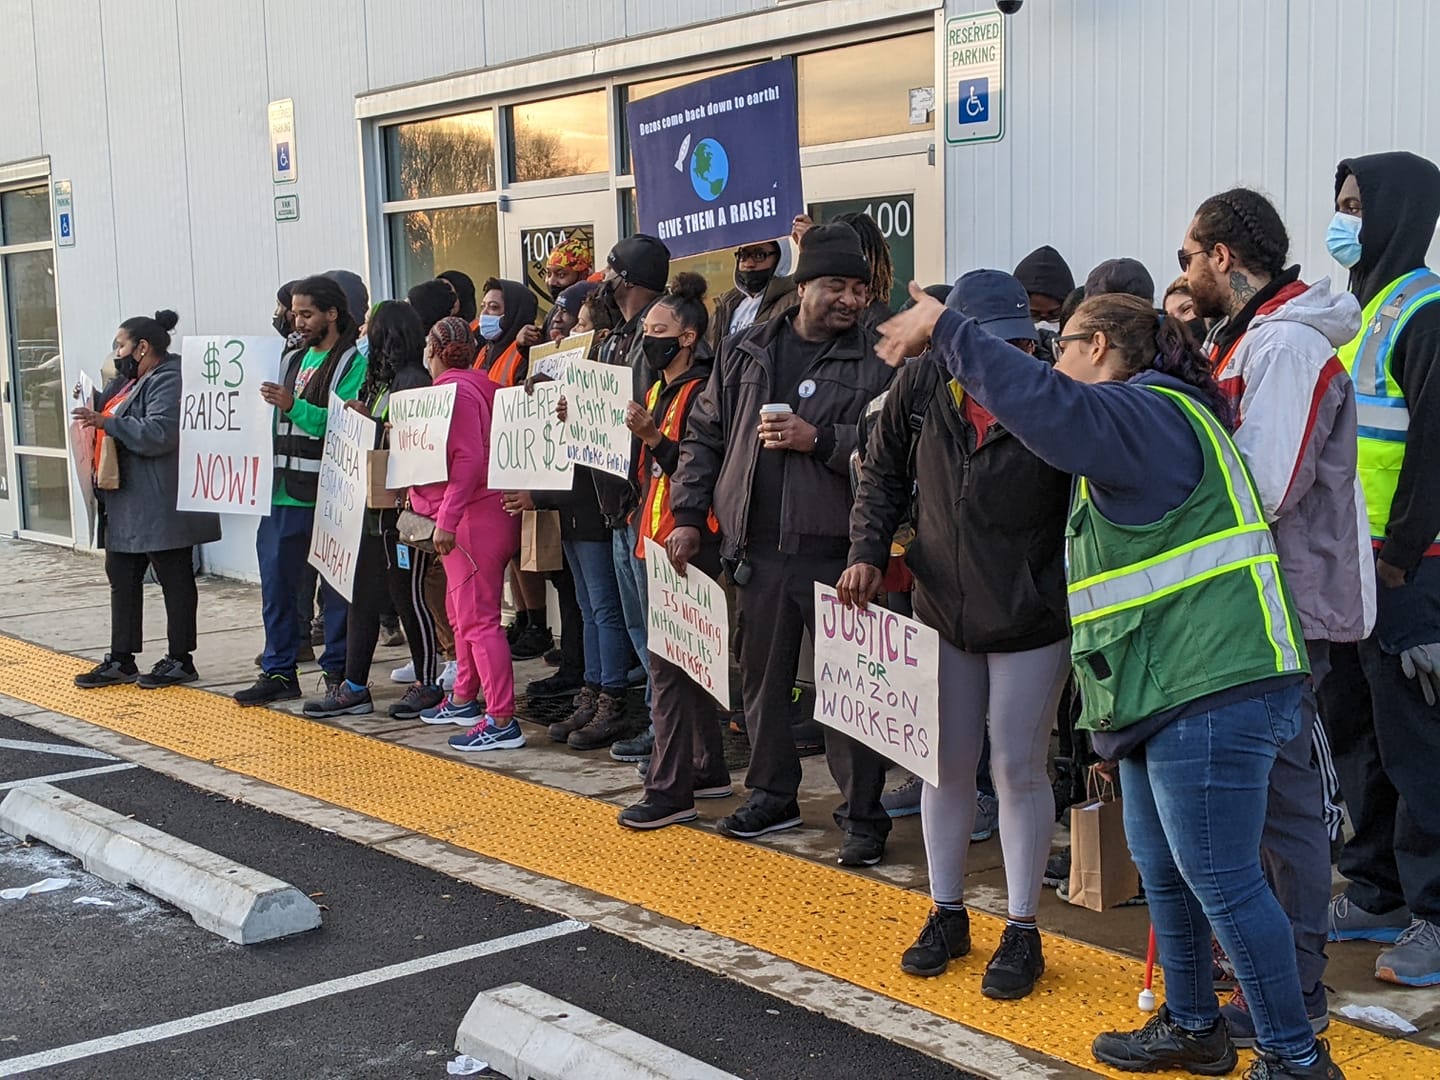  A crowd of workers wearing reflective vests and supporters in coats and hats stand in front of the glass entrance to Amazon Delivery Station DMD9, facing the parking lot and holding hand-made signs that read, “$3 RAISE NOW!” “AMAZON ESCUCHA ESTAMOS EN LA LUCHA!” “AMAZONIANS UNITED,” “WHERE’S OUR $3,” “When we fight back we win,” “AMAZON IS NOTHING WITHOUT ITS WORKERS,” and “JUSTICE FOR AMAZON WORKERS.” 